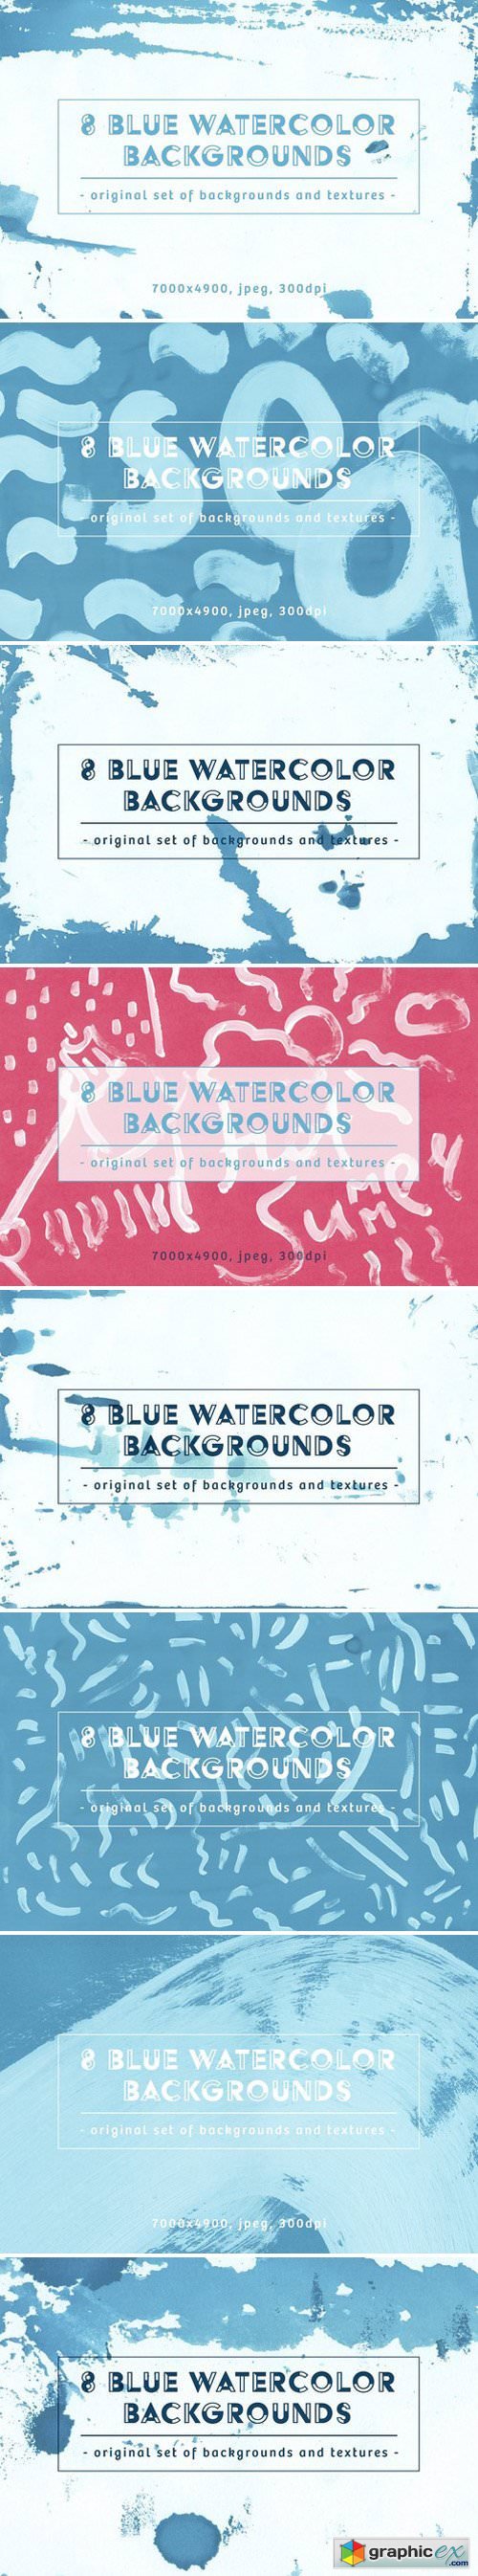 Set of 8 Blue watercolor Backgrounds